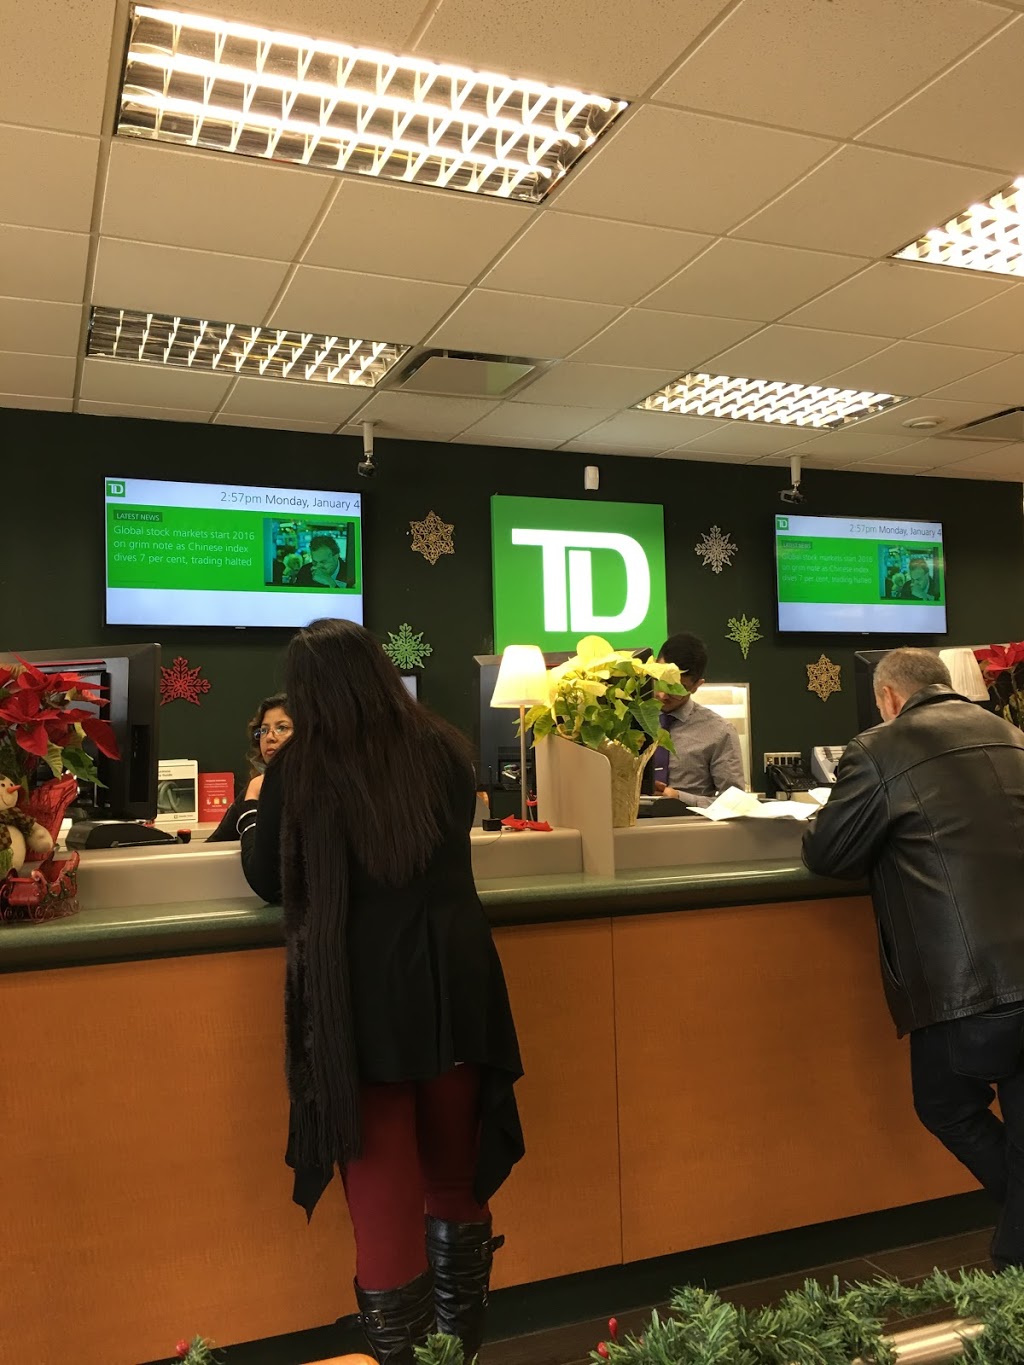 TD Canada Trust Branch and ATM | atm | 510 St Clair Ave W, Toronto, ON M6C 1A2, Canada | 4166533507 OR +1 416-653-3507